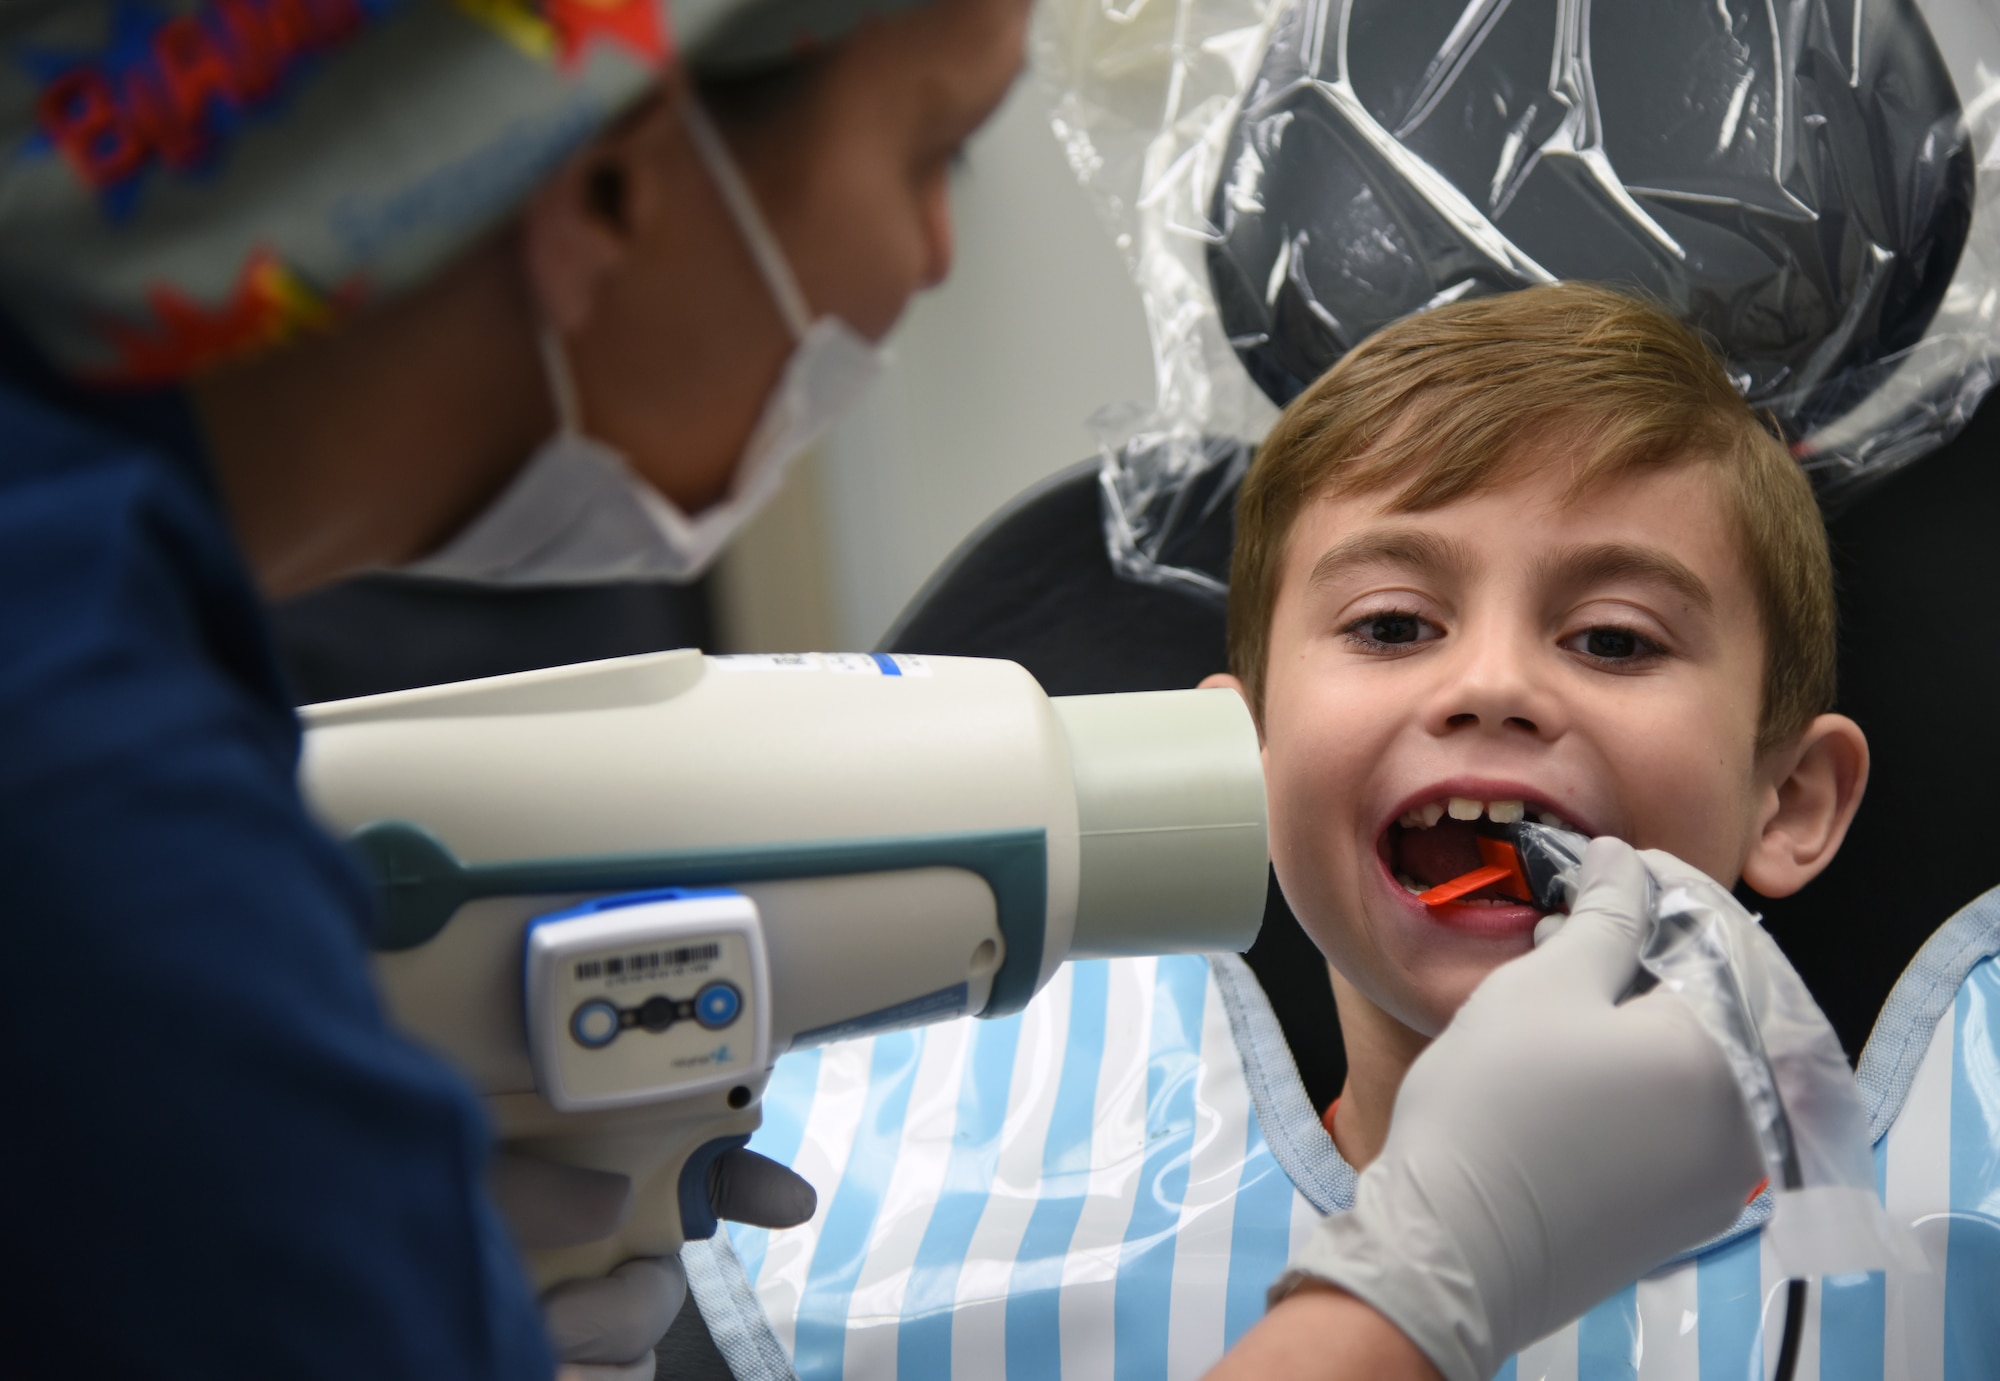 Regina Yarbrough, 81st Dental Squadron dental technician, conducts an X-ray exam on Raylan Wanhala, son of U.S. Air Force Tech. Sgt. Daniel Wanhala, 81st Security Forces Squadron flight chief, during the 9th Annual Give Kids a Smile Day at the dental clinic inside the Keesler Medical Center at Keesler Air Force Base, Mississippi, Feb. 15, 2019. The event was held in recognition of National Children's Dental Health Month and included free dental exams, radiographs and cleanings for children age two and older. (U.S. Air Force photo by Kemberly Groue)